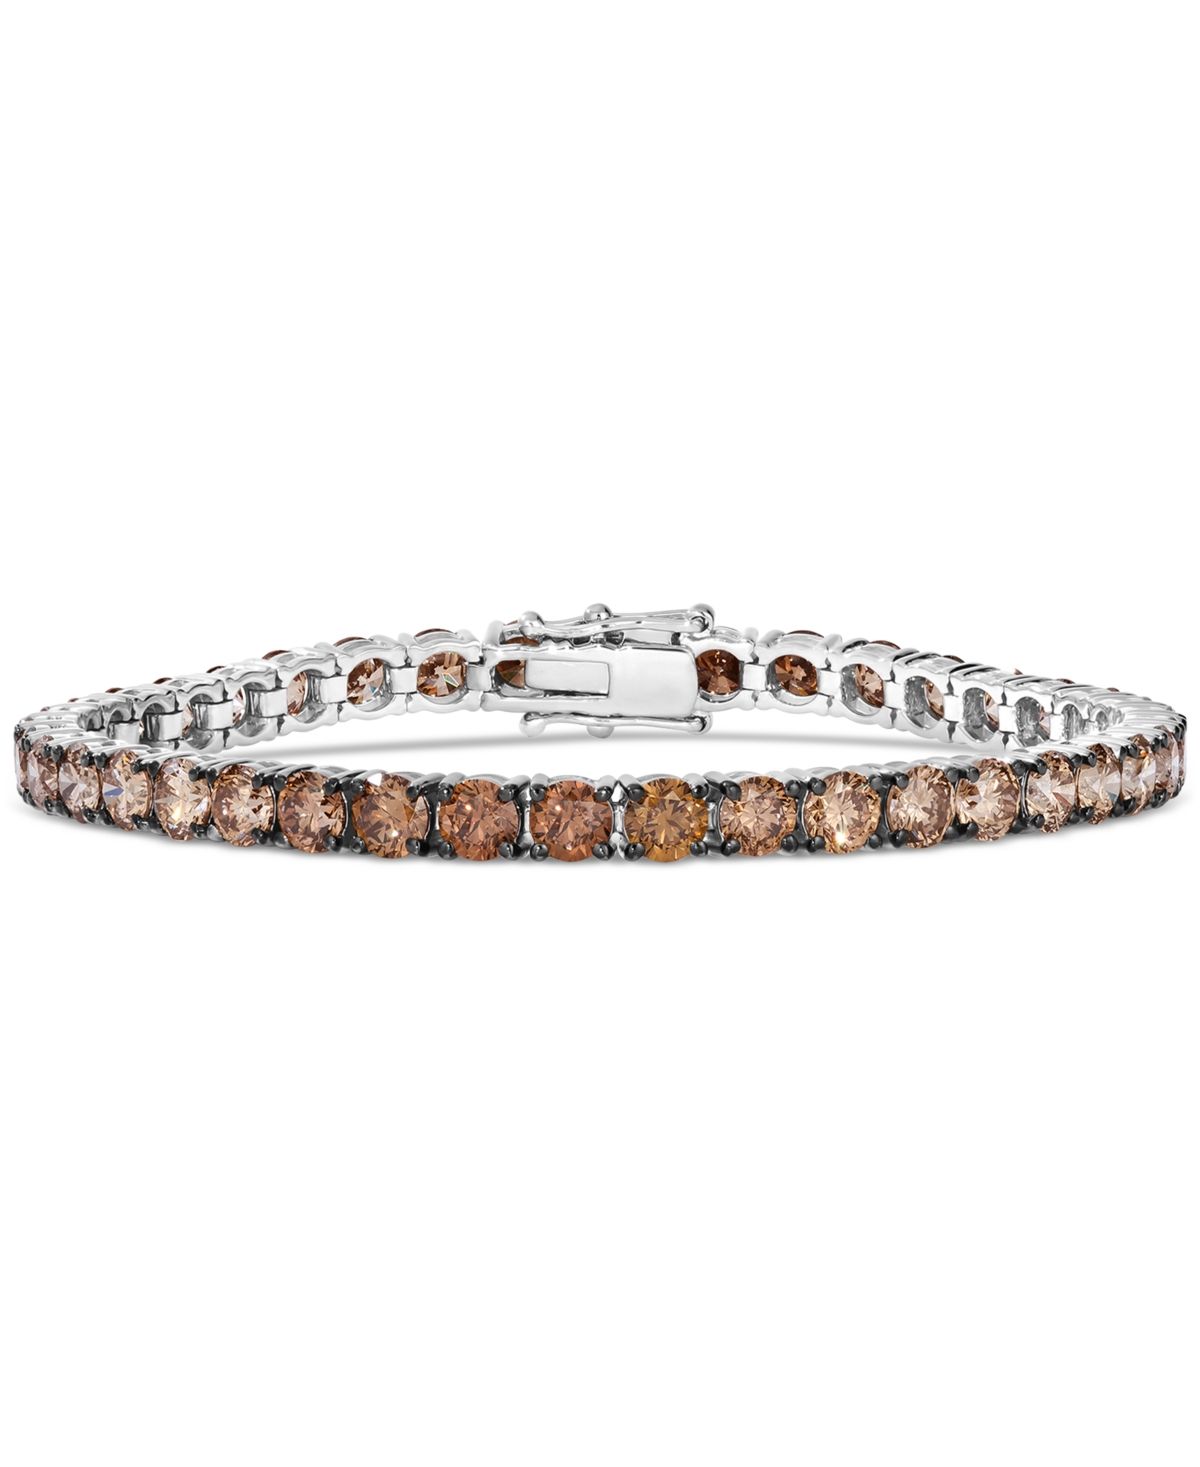 Red Carpet Chocolate Ombre Diamond Tennis Bracelet (12-5/8 ct. t.w.) in 14k White Gold